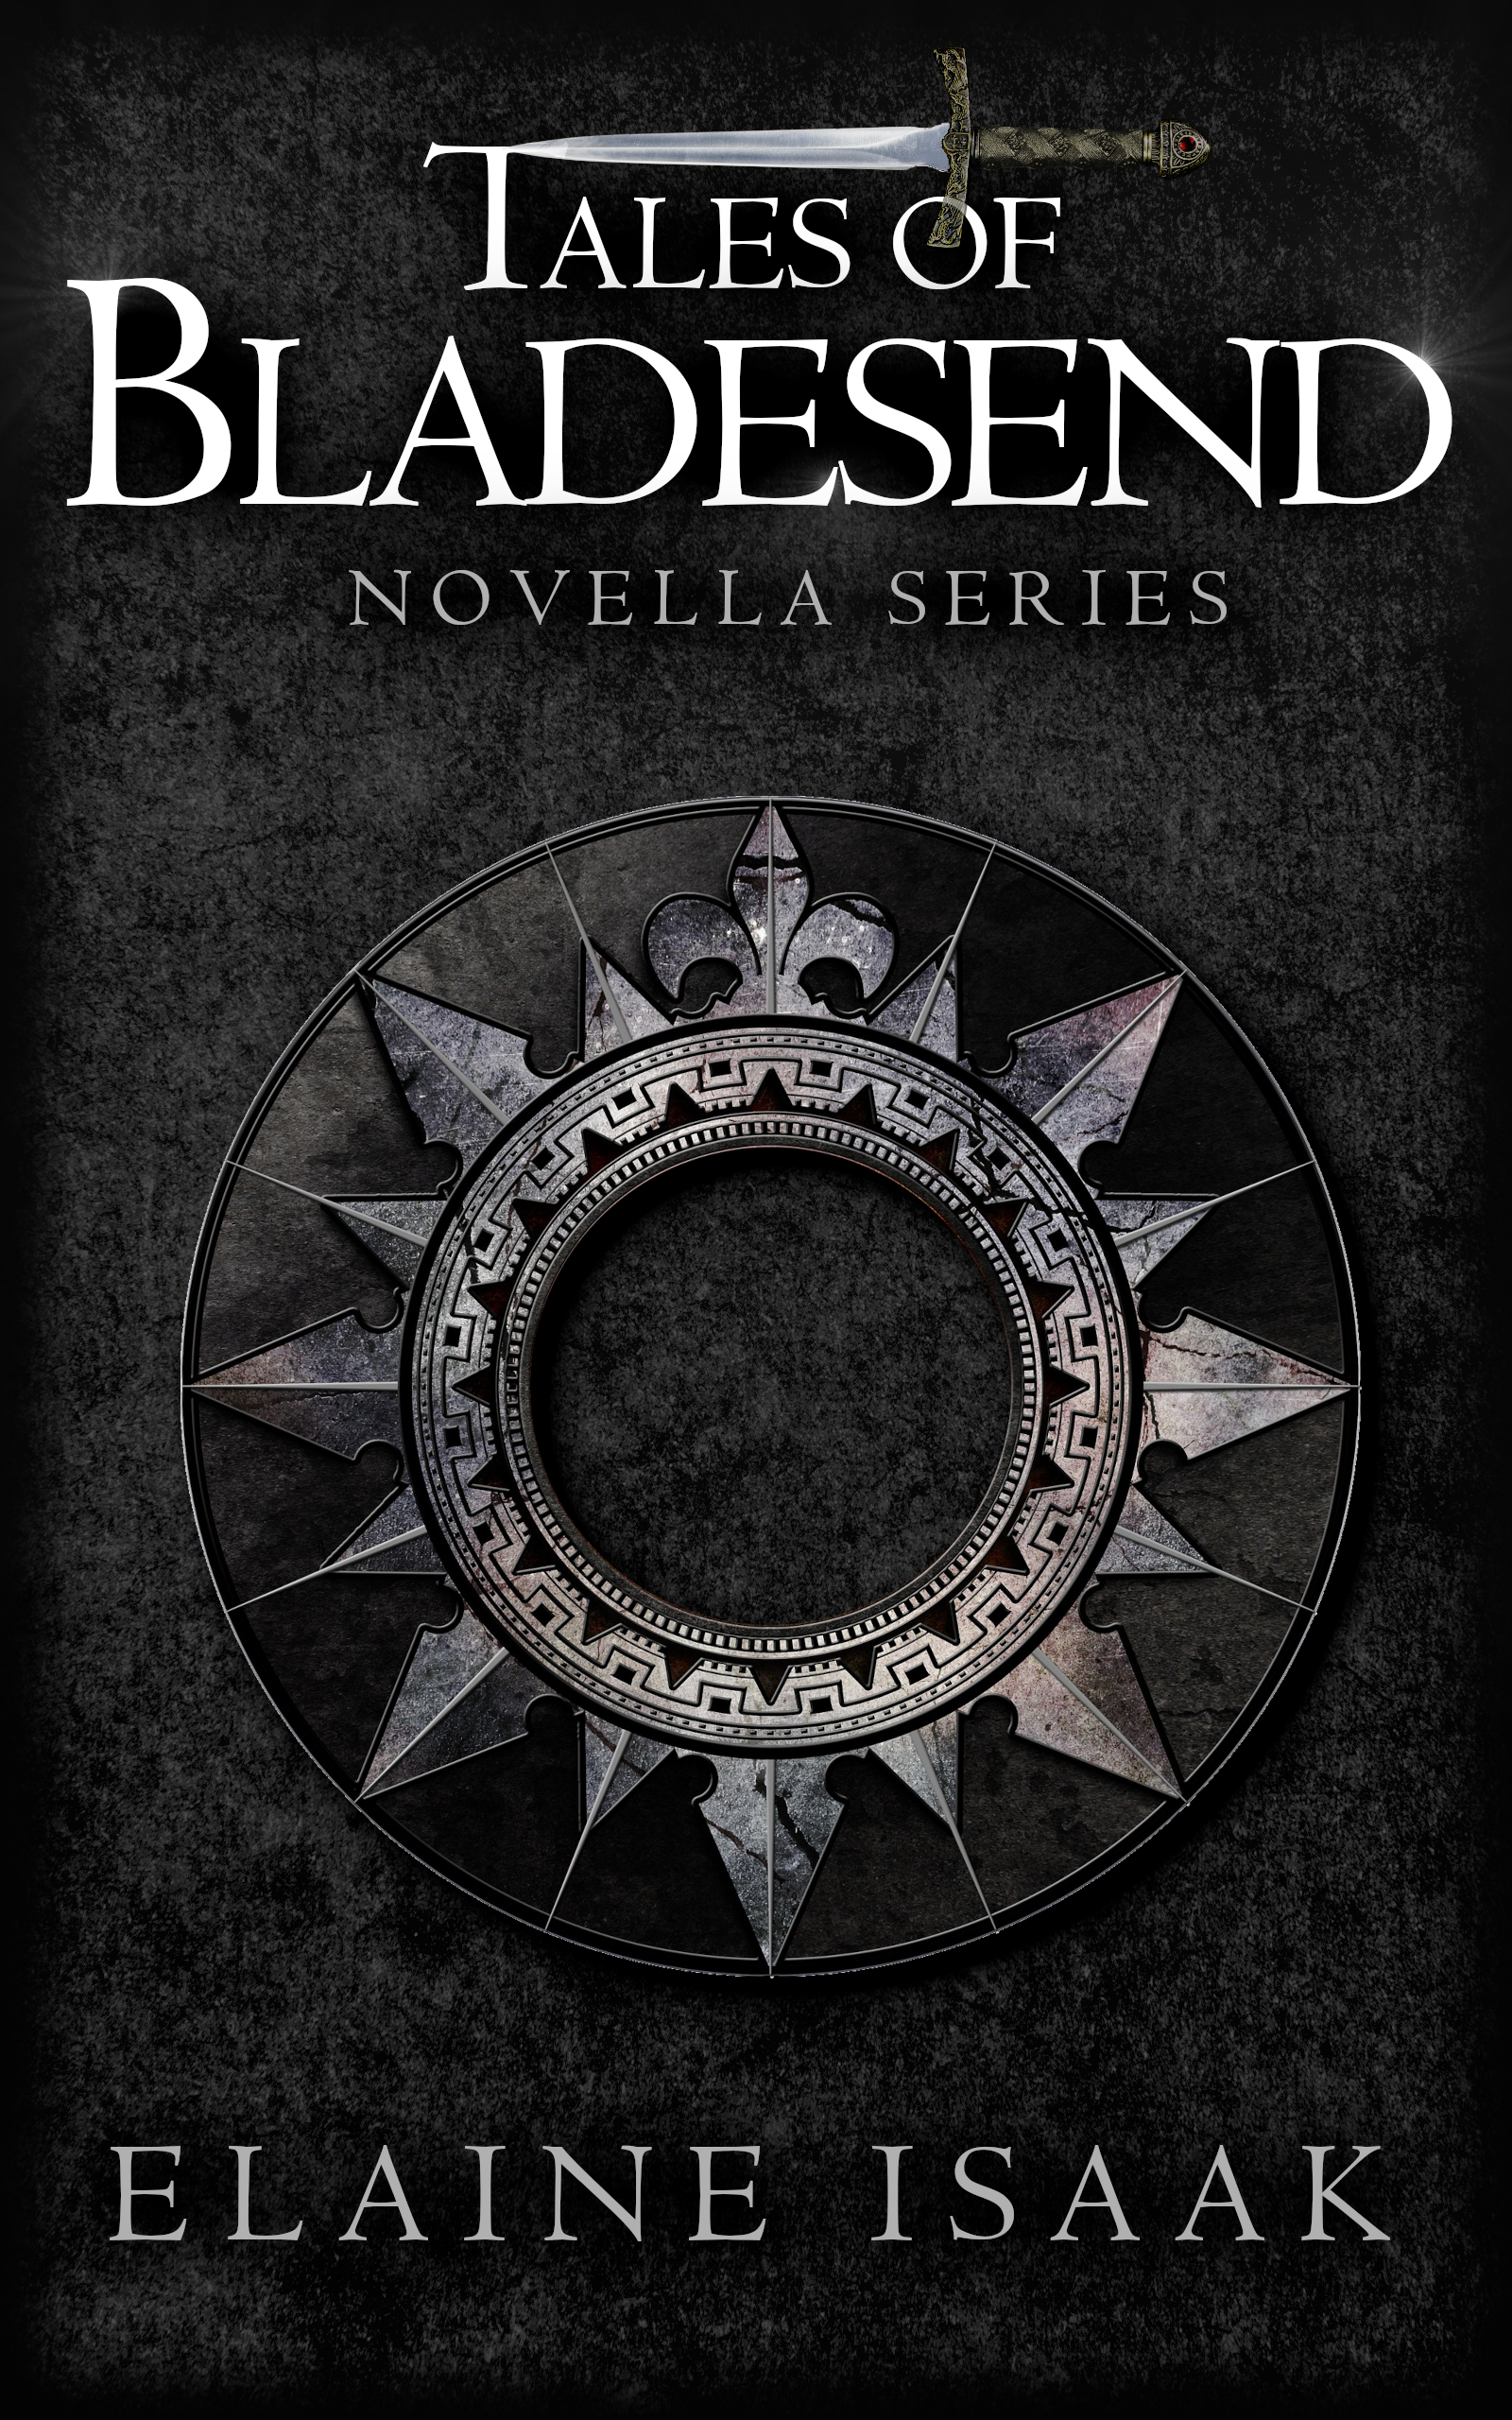 cover image for a book entitled Tales of Bladesend includes an antique compass design